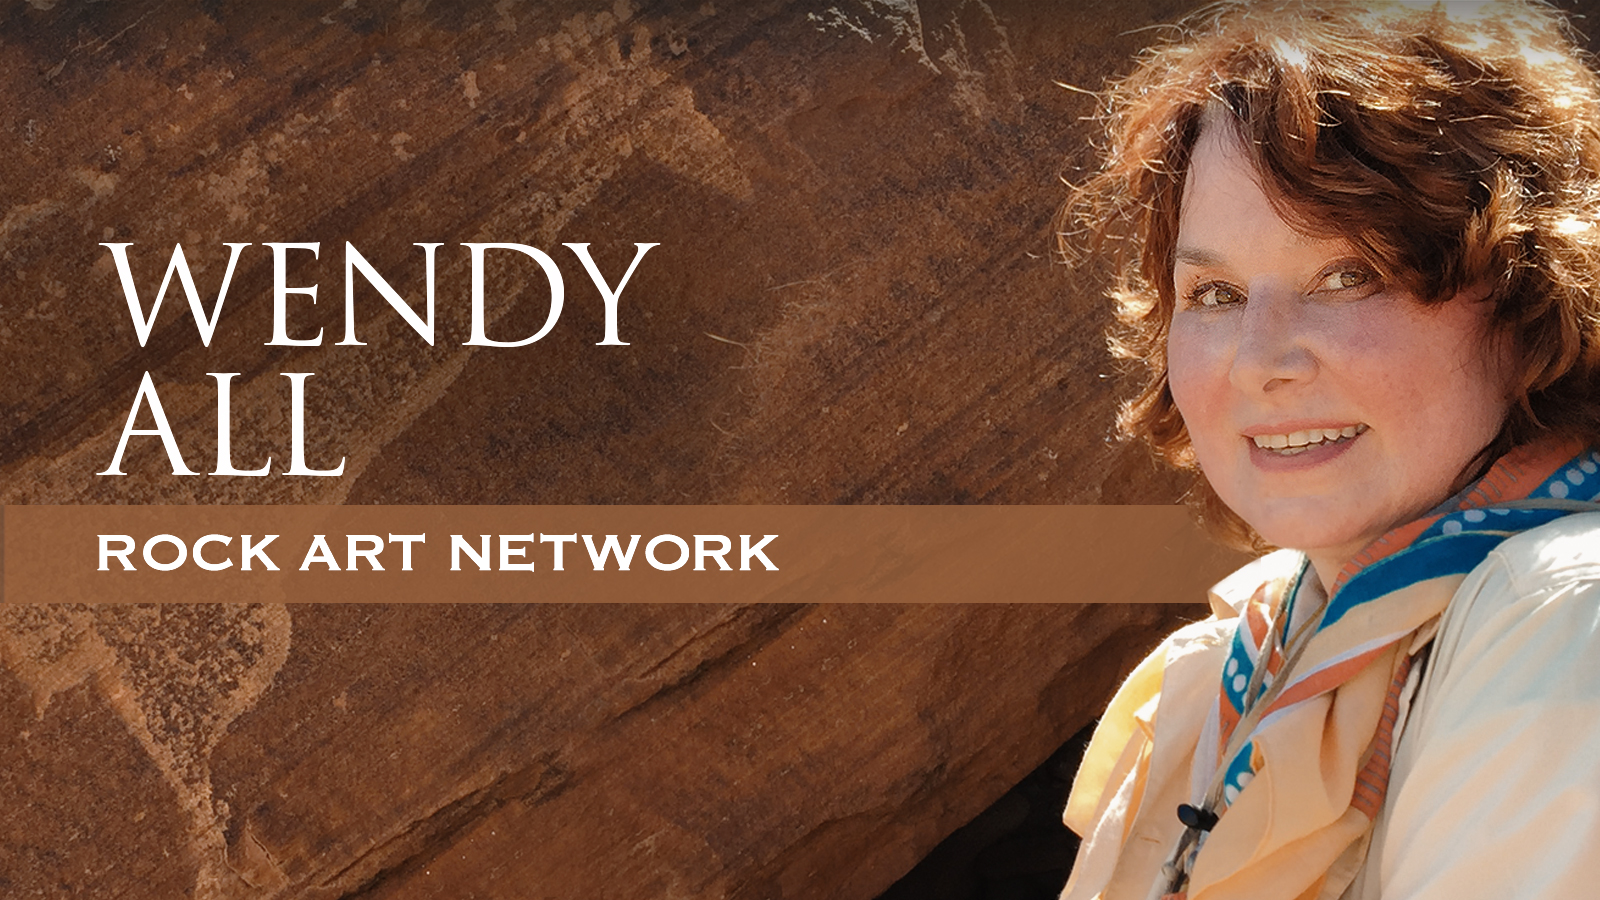 The Rock Art Network Wendy All